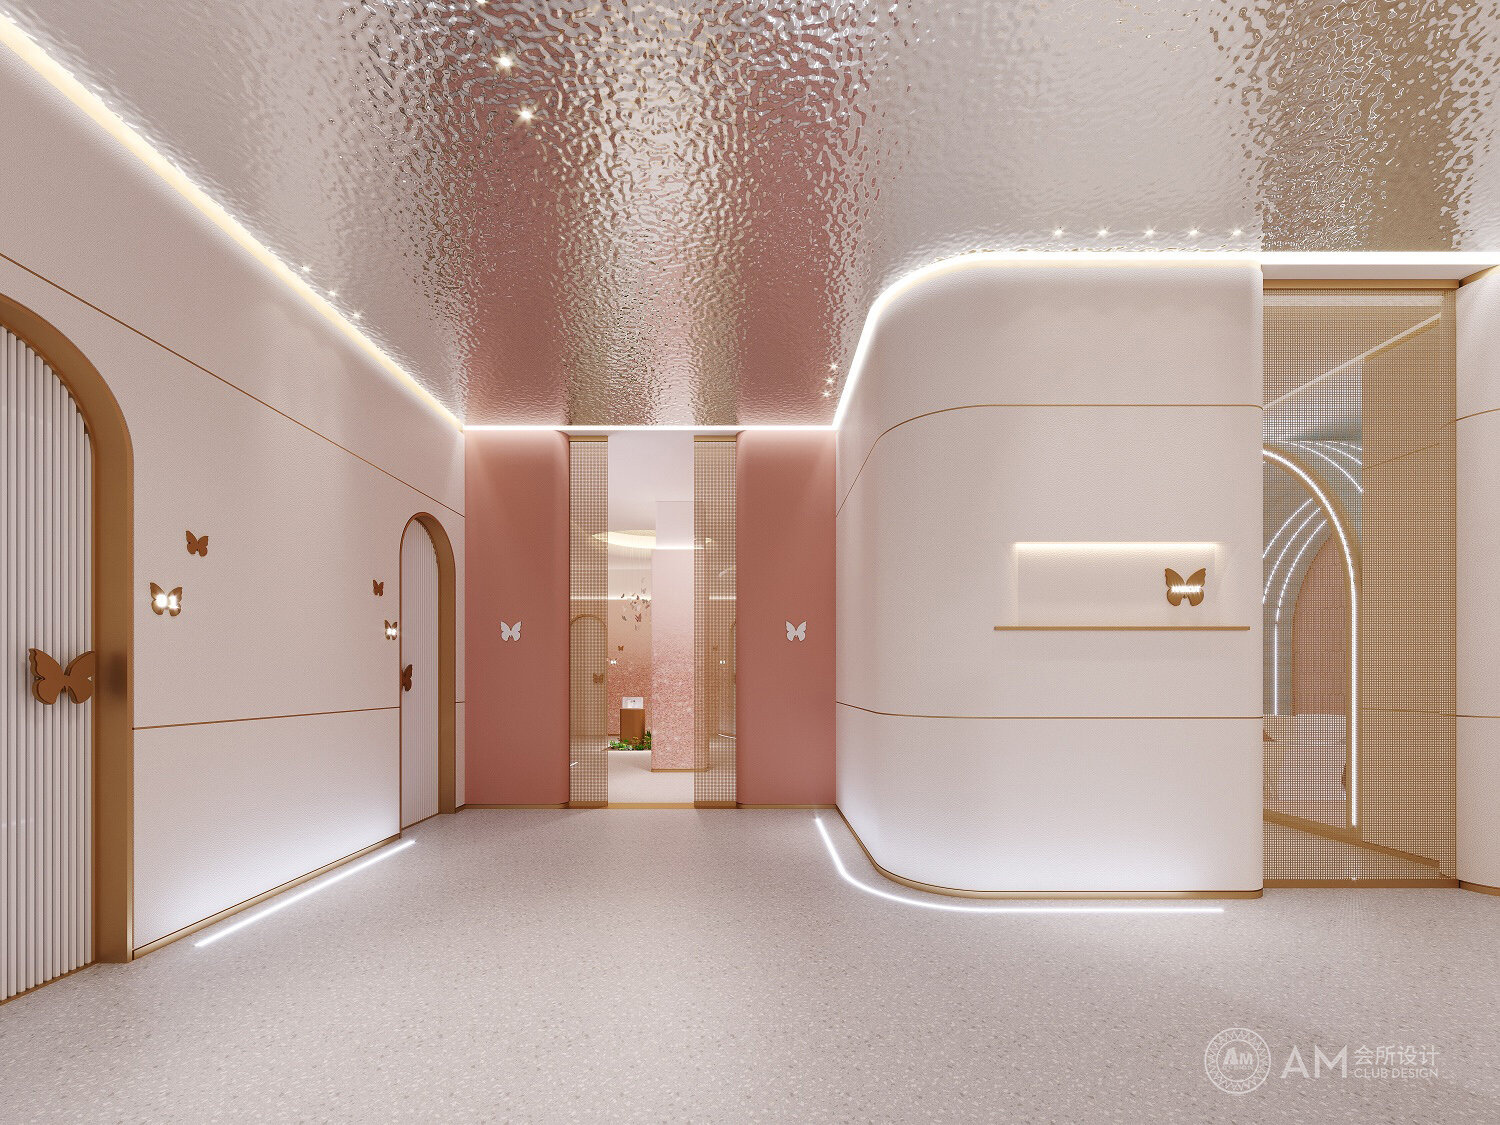 Entrance design of VIP area of am| andison beauty salon